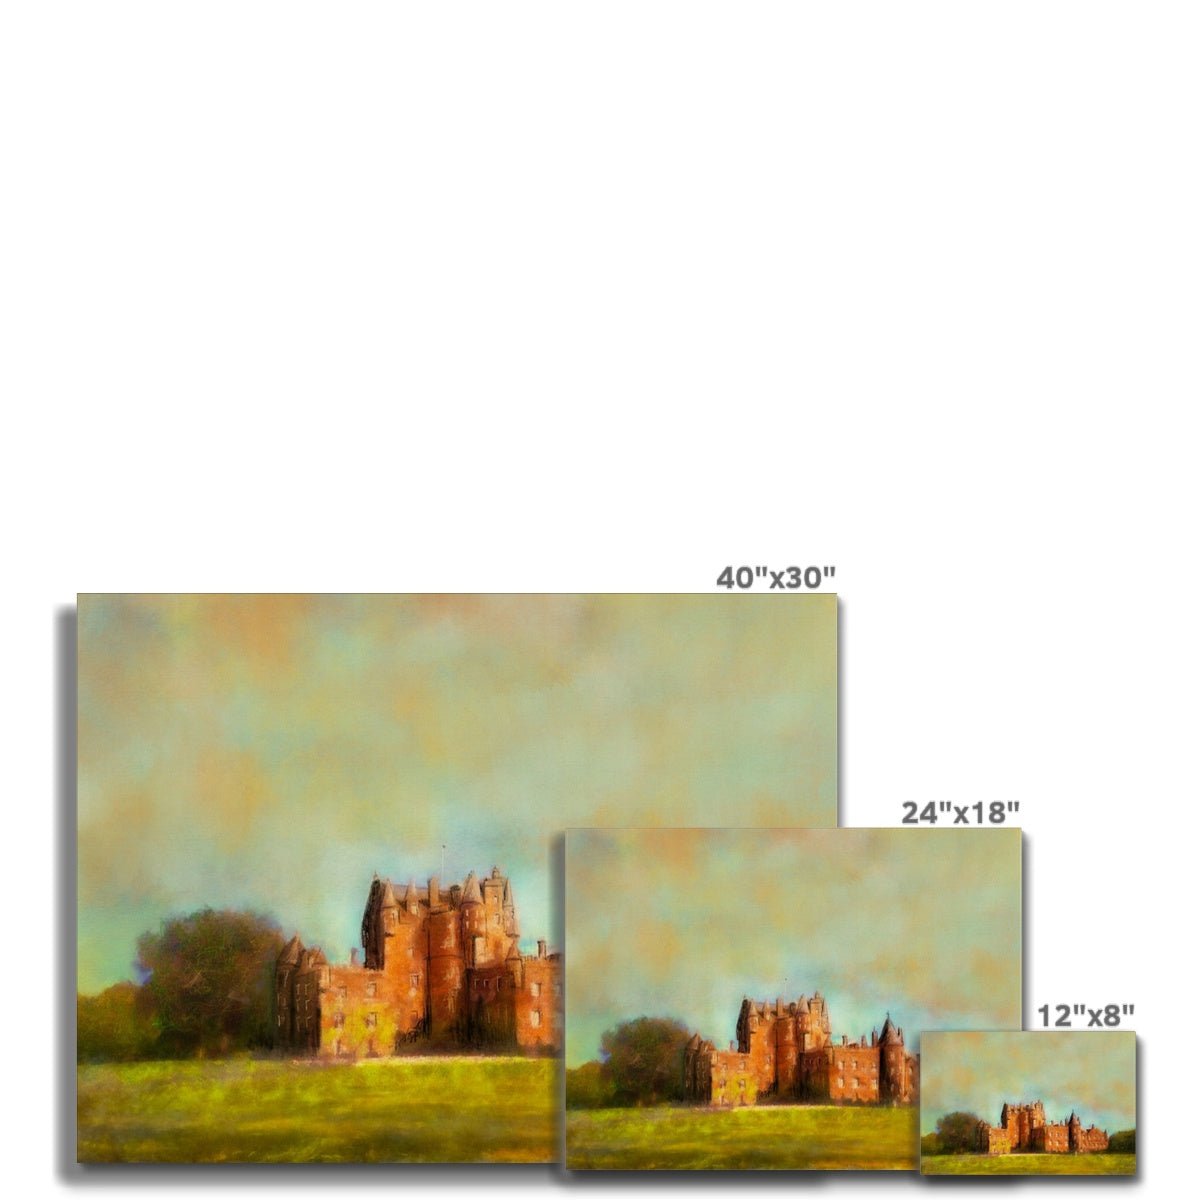 Glamis Castle Painting | Canvas From Scotland-Contemporary Stretched Canvas Prints-Historic & Iconic Scotland Art Gallery-Paintings, Prints, Homeware, Art Gifts From Scotland By Scottish Artist Kevin Hunter